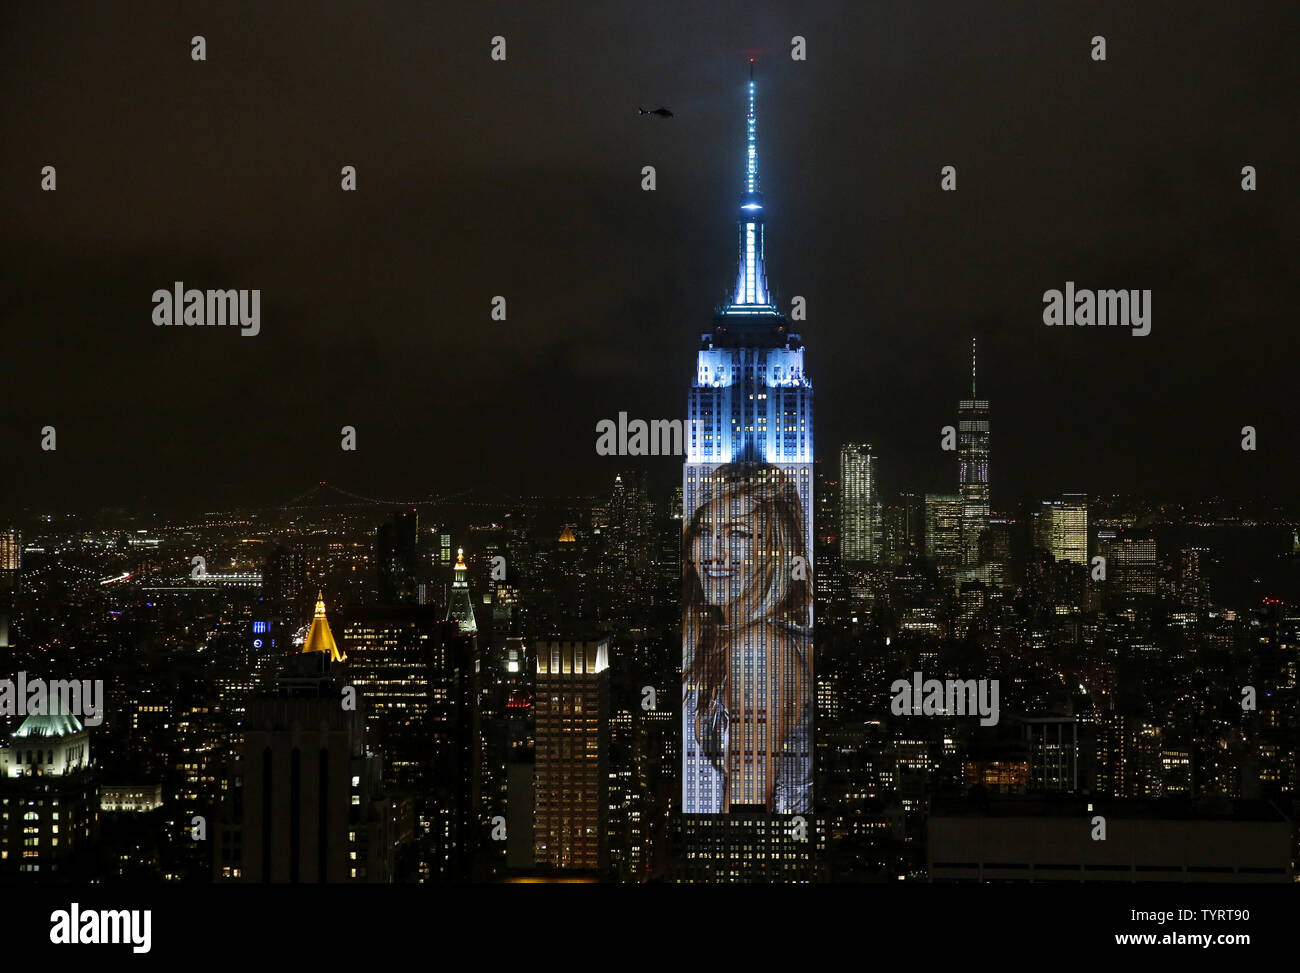 An artist rendering image of Jennifer Aniston is projected onto the Empire State Building in the Manhattan skyline to celebrate Harper Bazaar's 150th anniversary on April 19, 2017 in New York City. Spanning 42 floors of the building and rising 500 feet high, the show featured iconic fashion images of everyone from Audrey Hepburn to Kate Moss, including iconic works by the likes of Andy Warhol.     Photo by John Angelillo/UPI Stock Photo